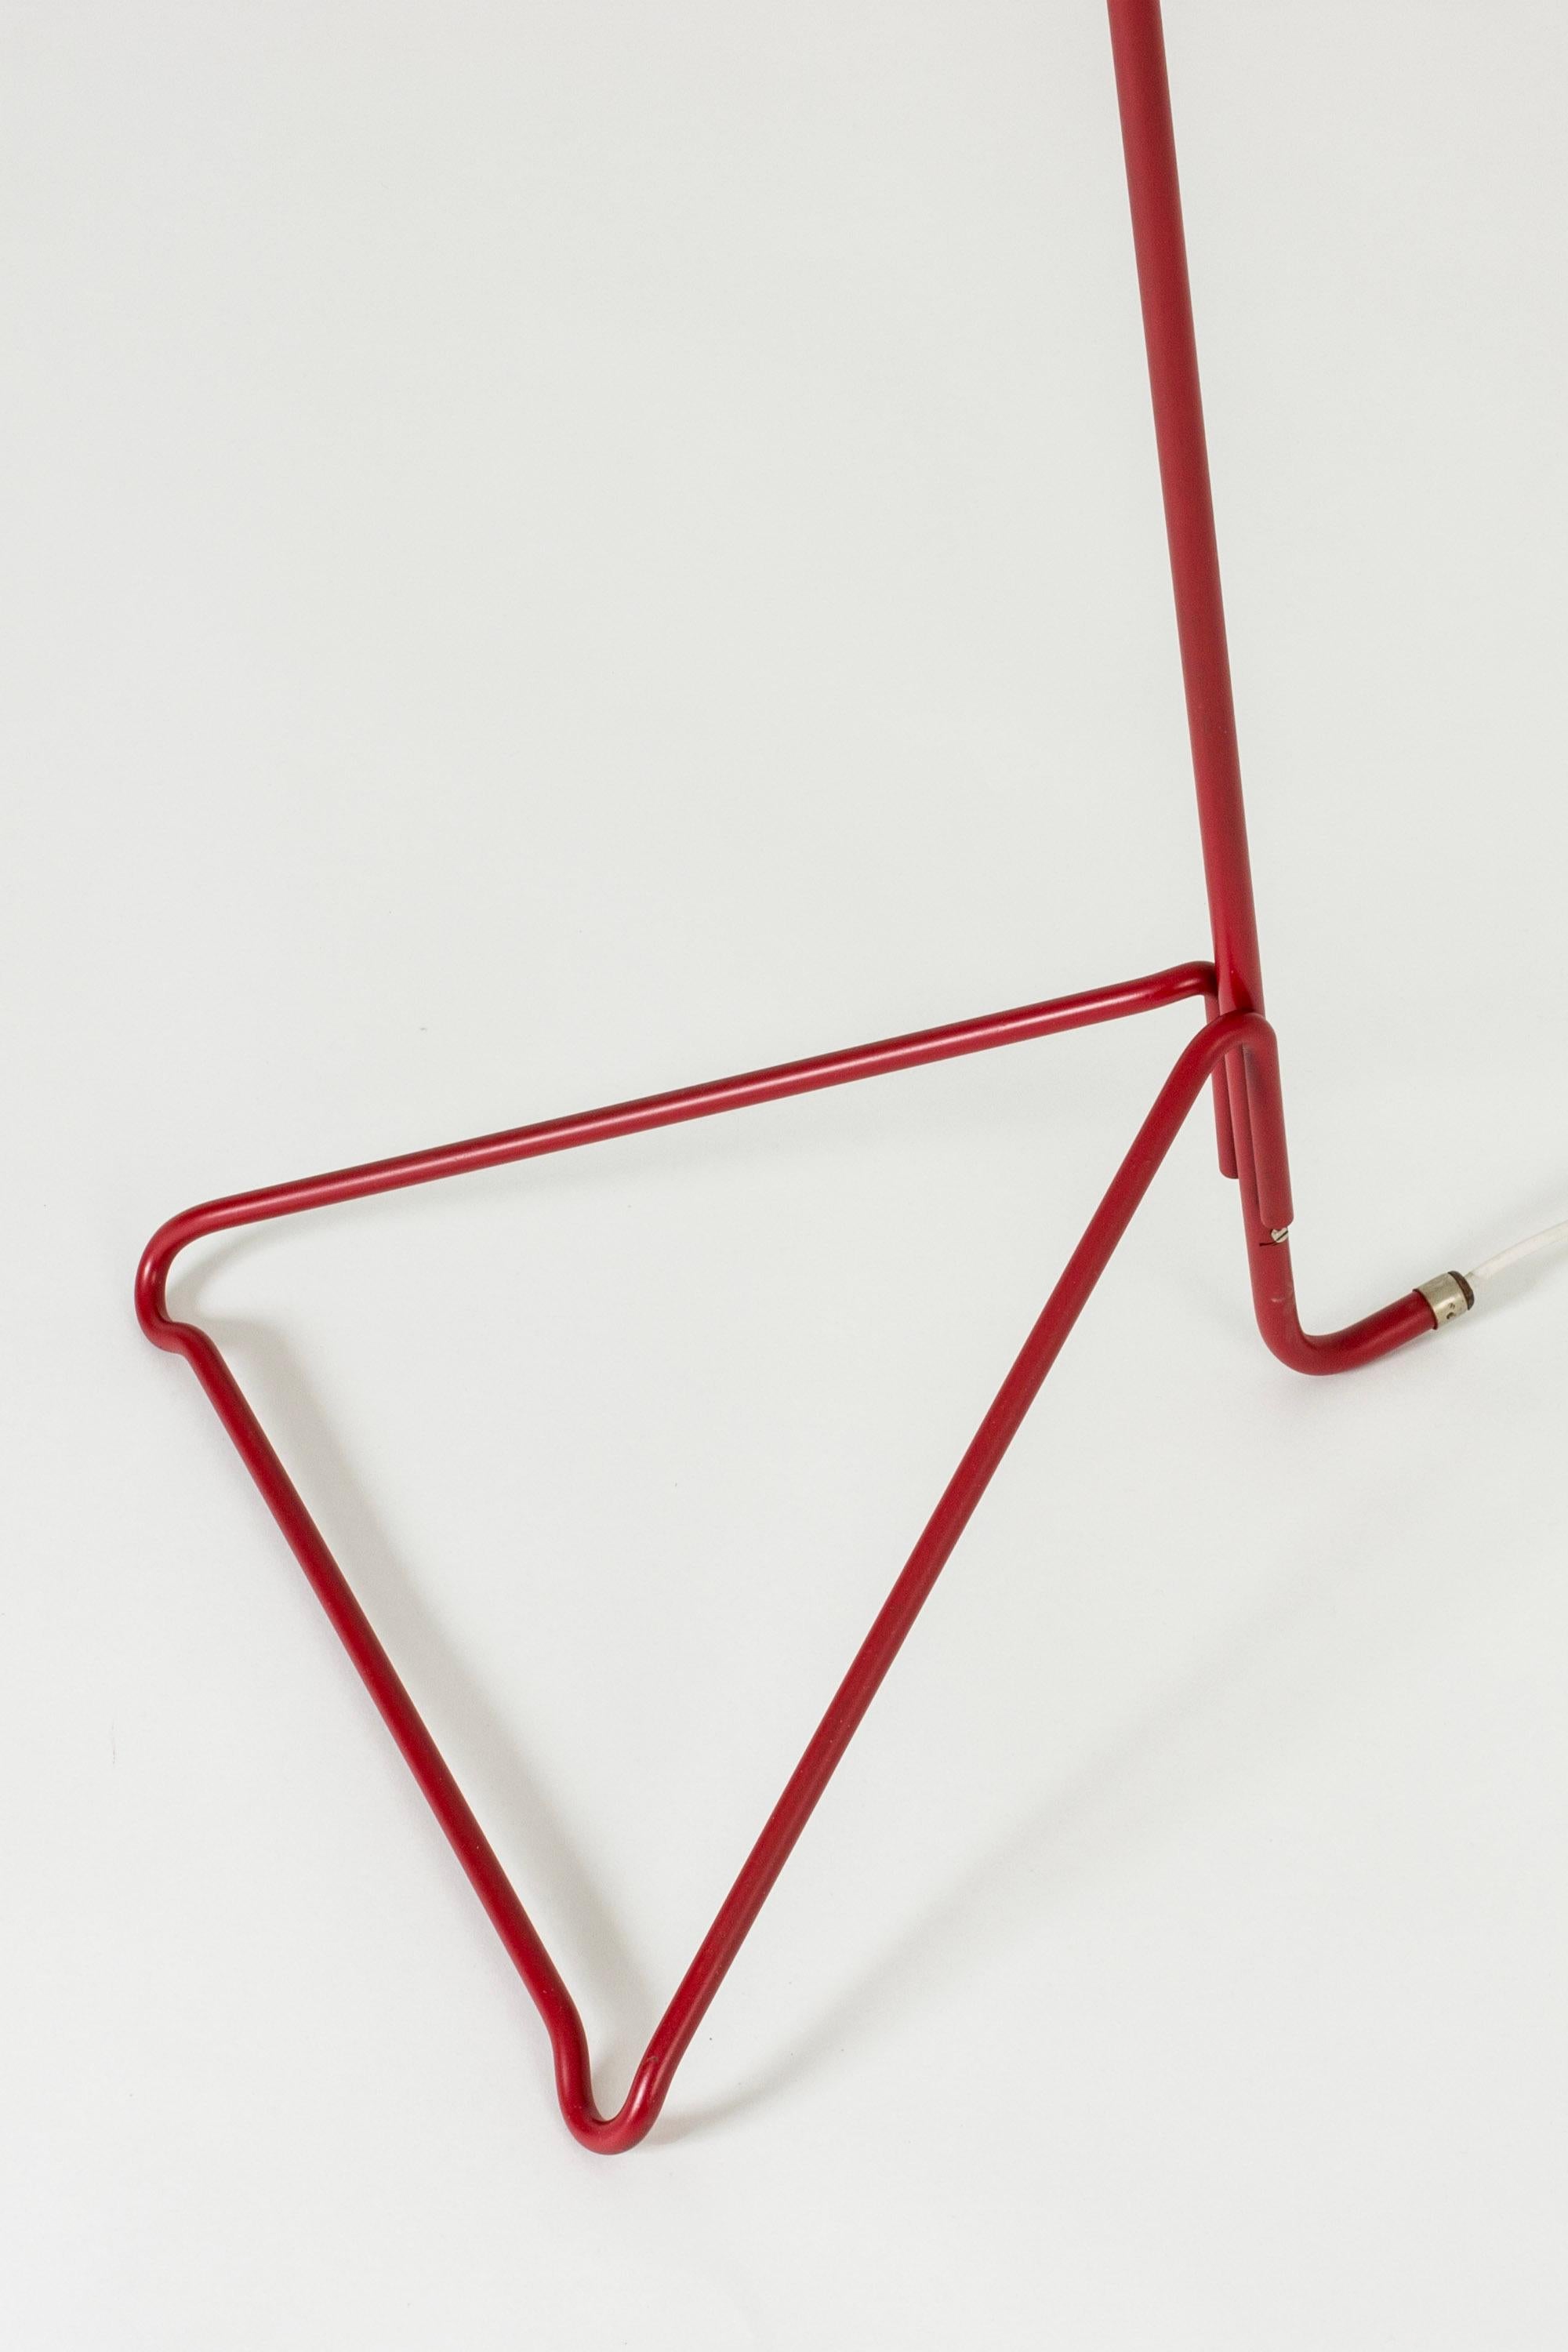 Cool floor lamp from ASEA, with distinct lines making use of negative space. Lacquered cherry red.